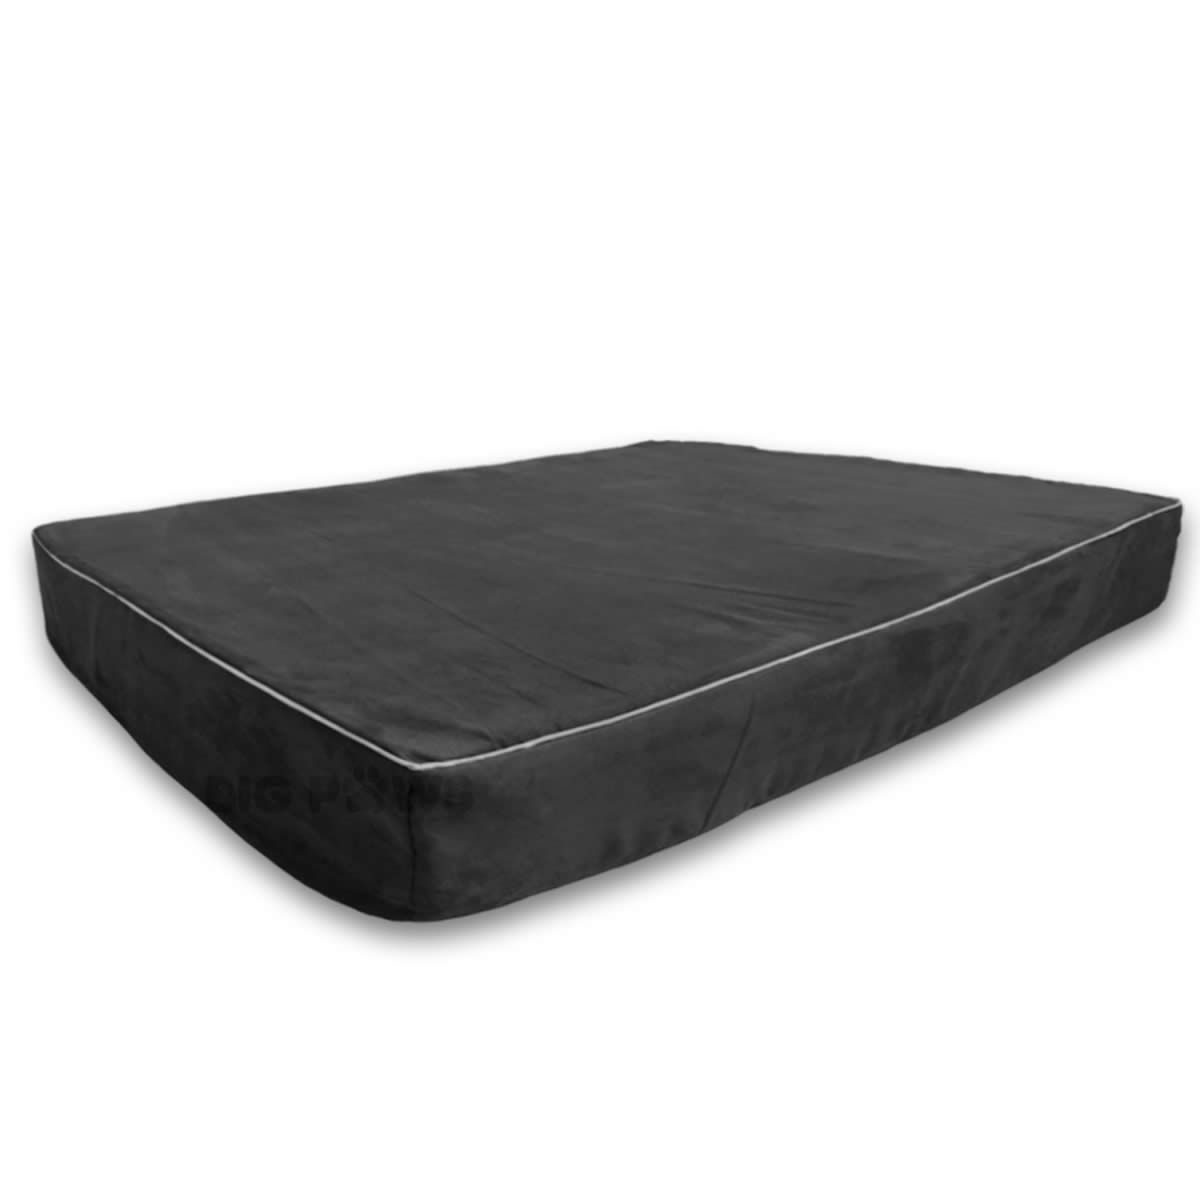 Big Paws 12cm Thick Memory Foam Dog Bed - Charcoal Grey